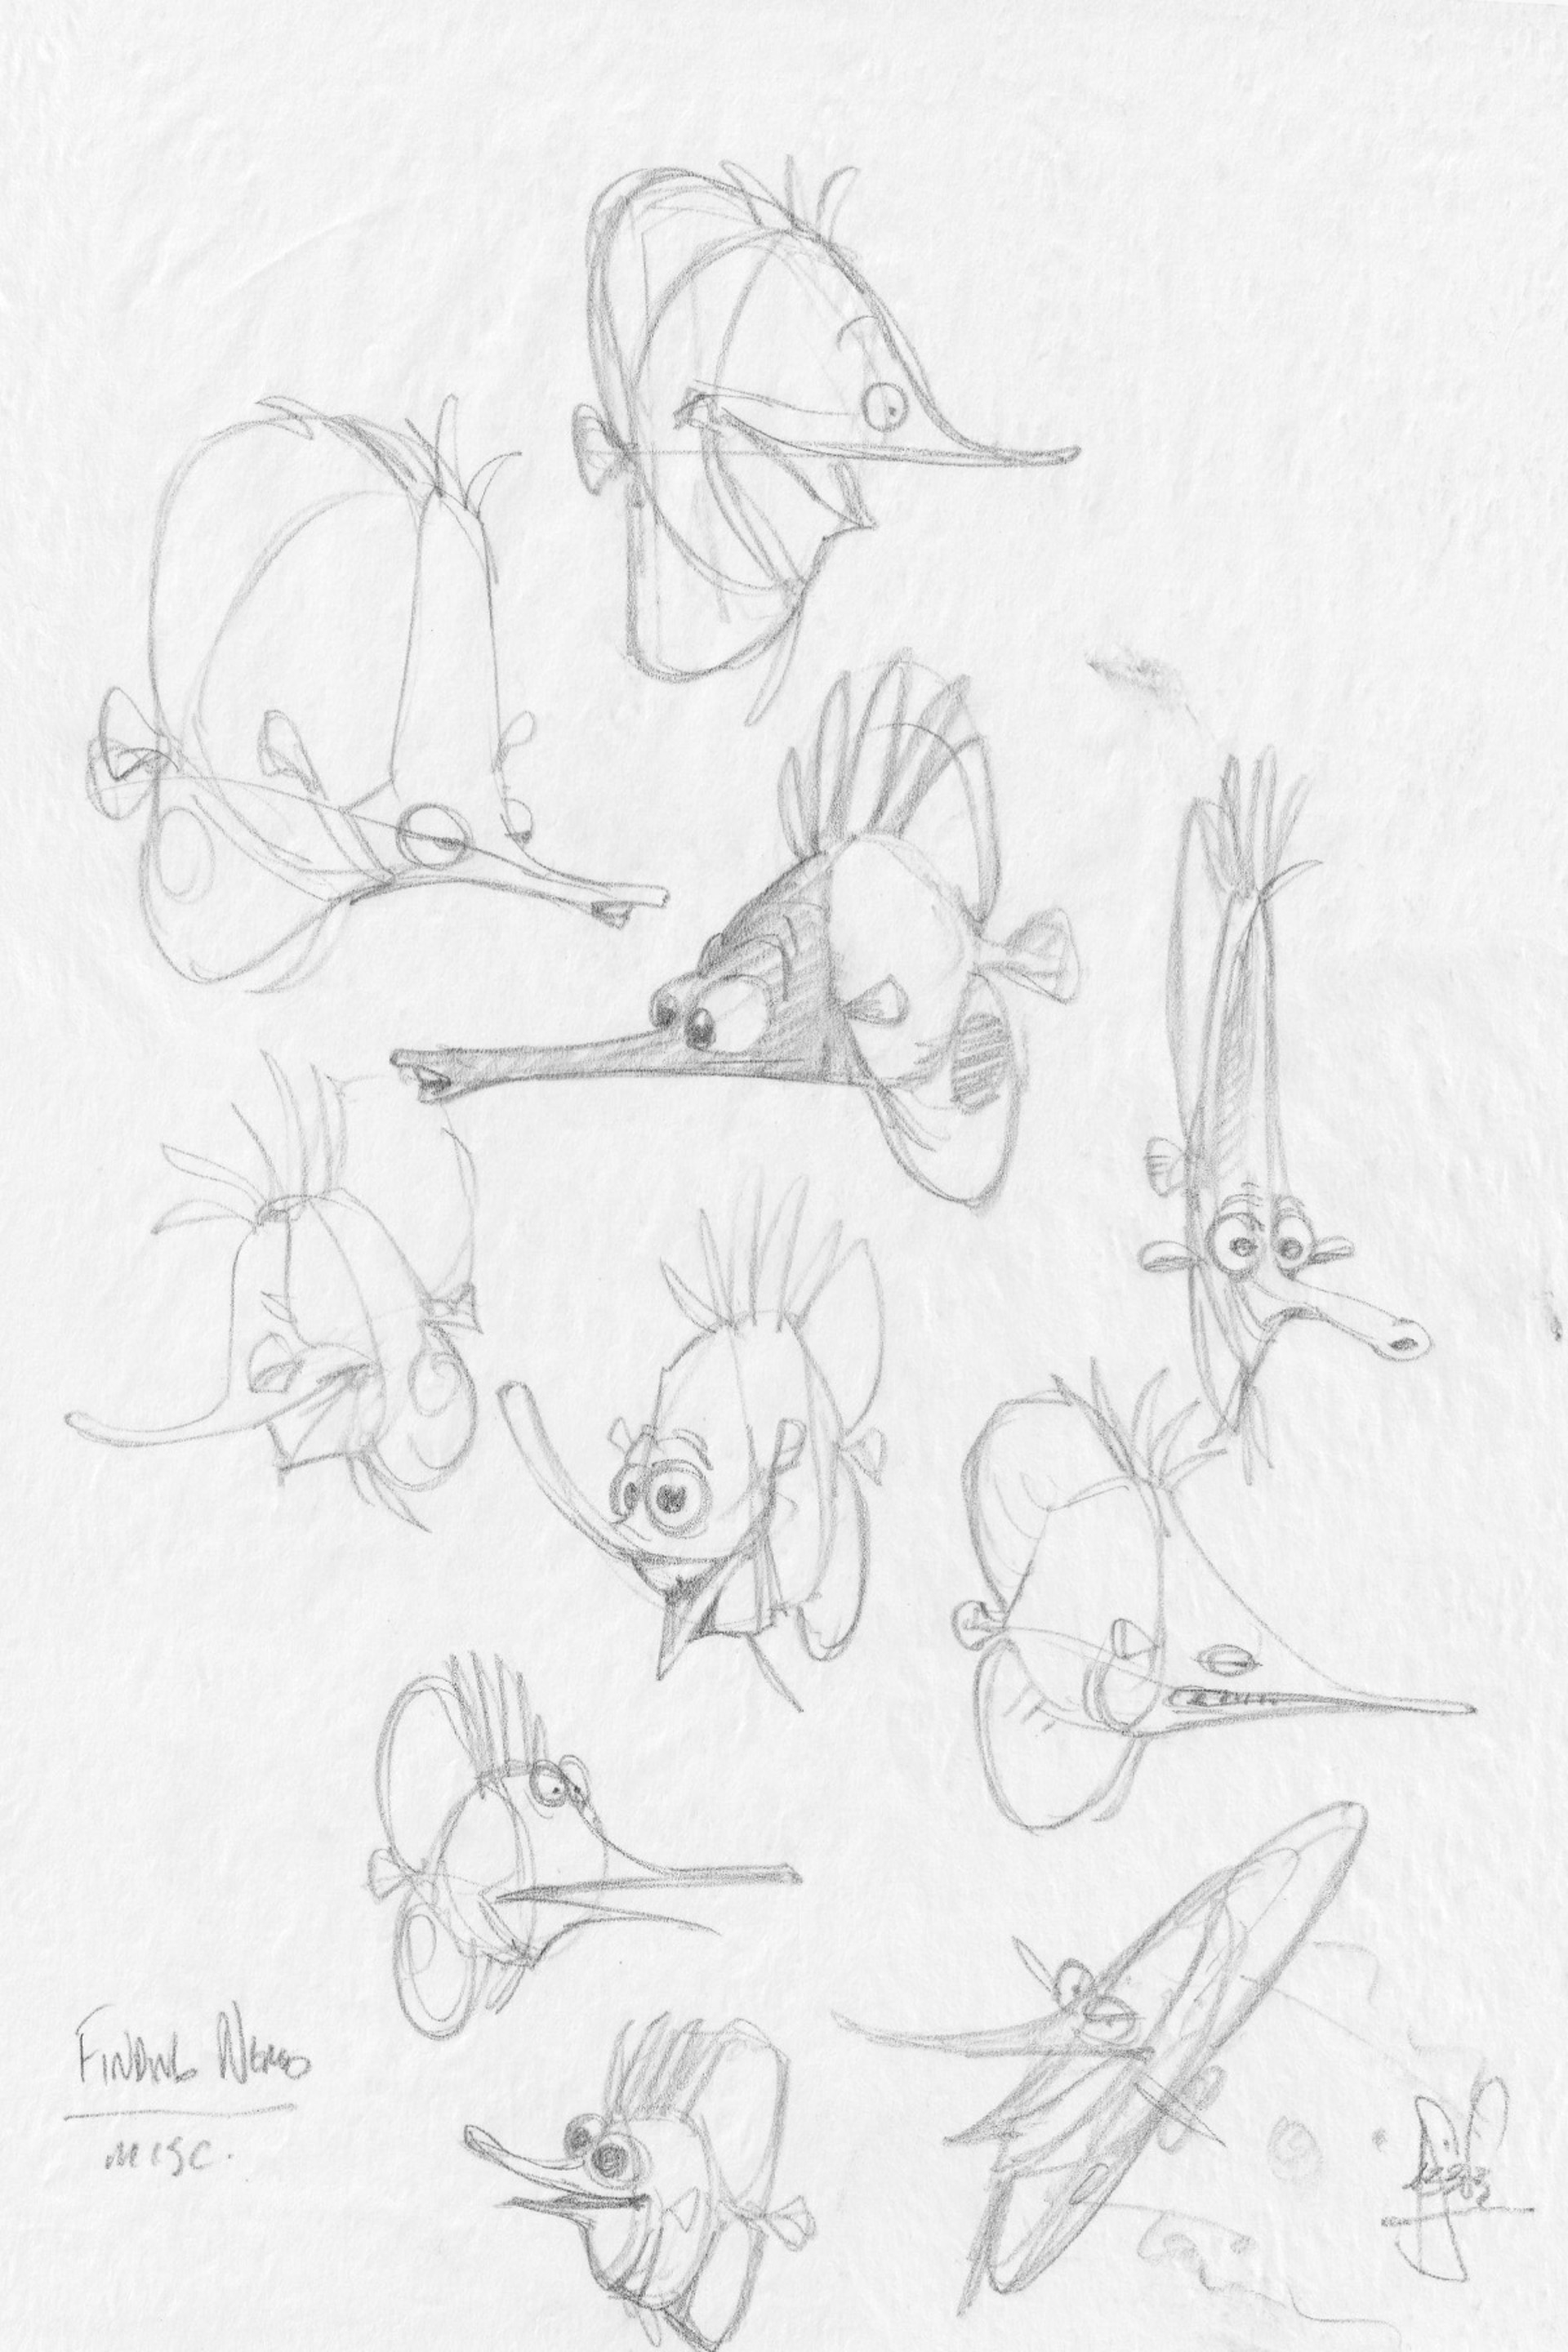 Finding Nemo, Early character studies for miscellaneous fish by Peter de Sève